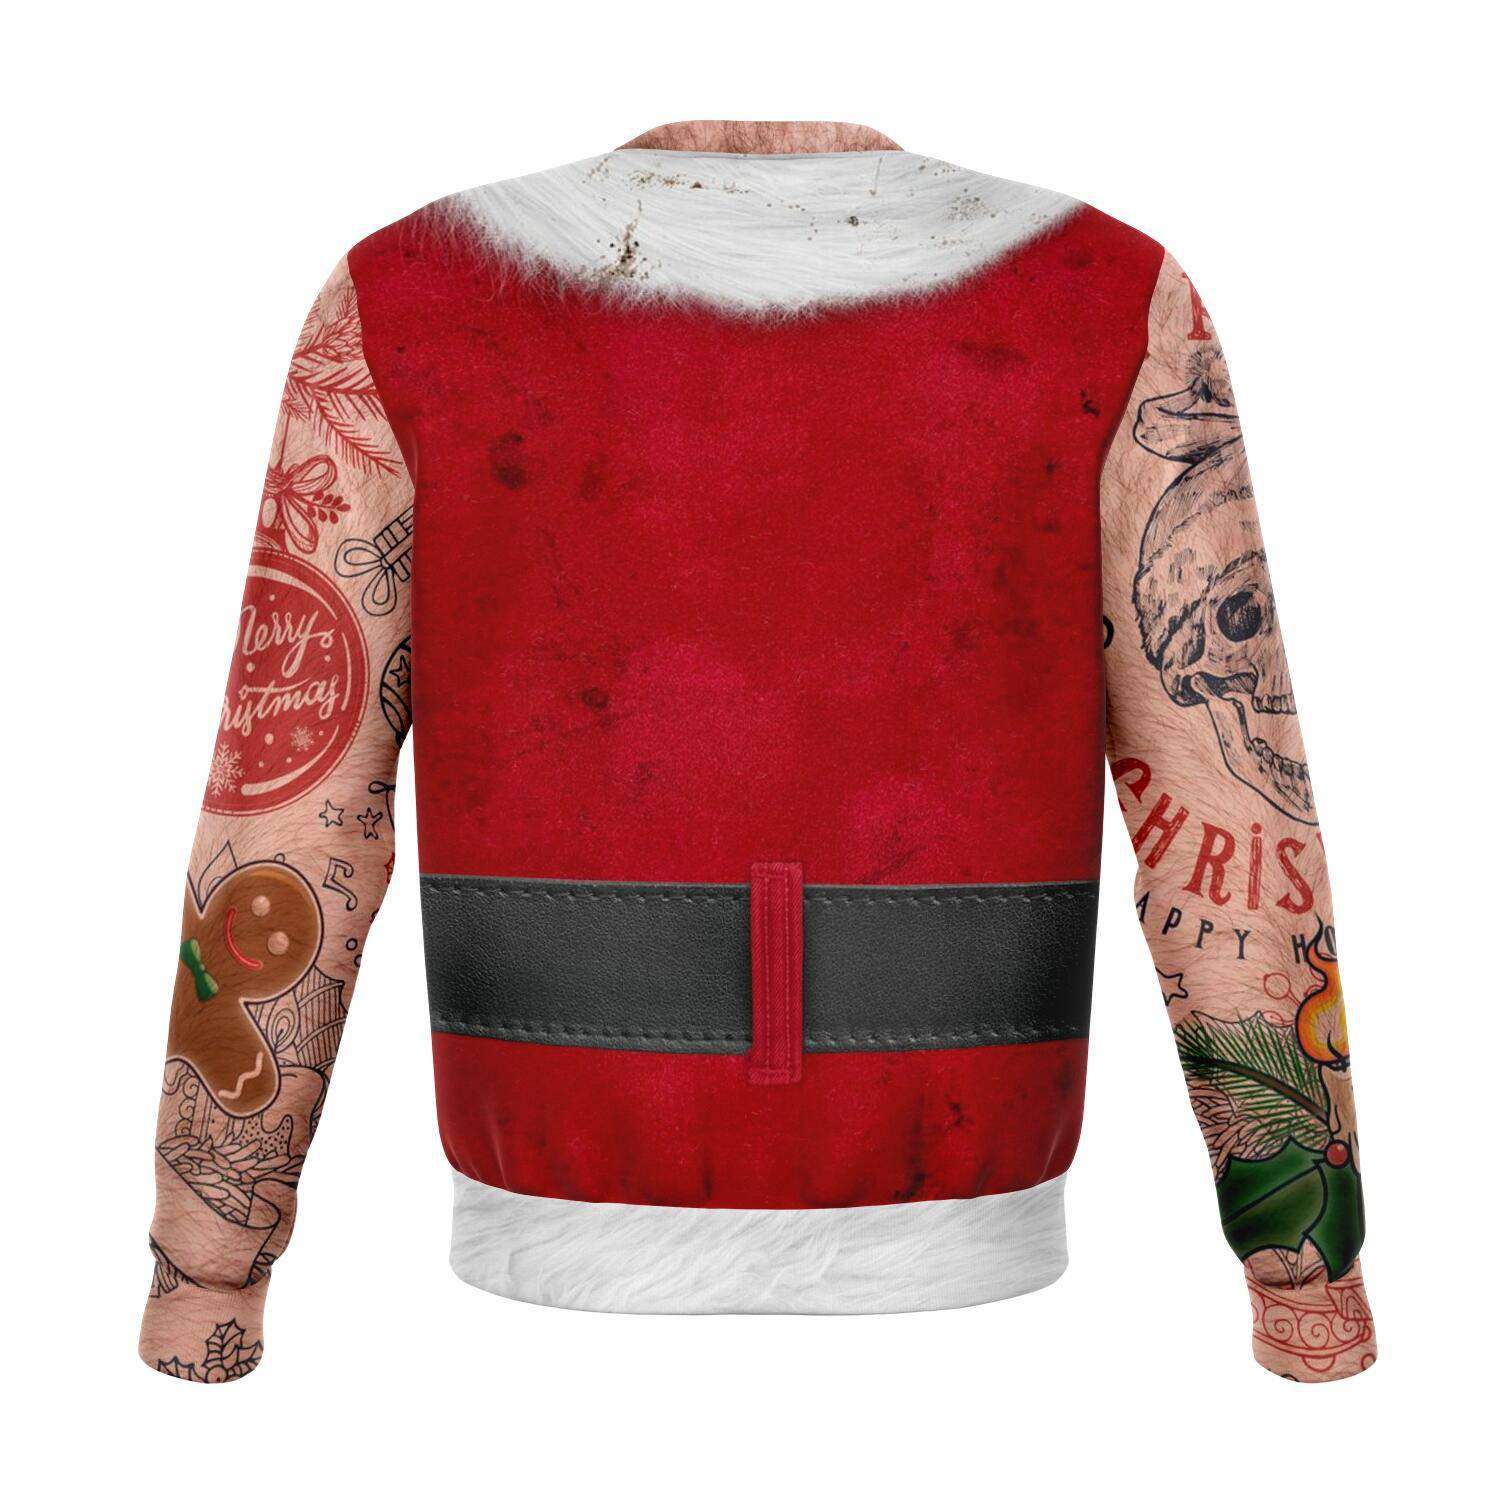 Convict Santa Ugly Christmas Sweater Order By December 5 - Powderaddicts